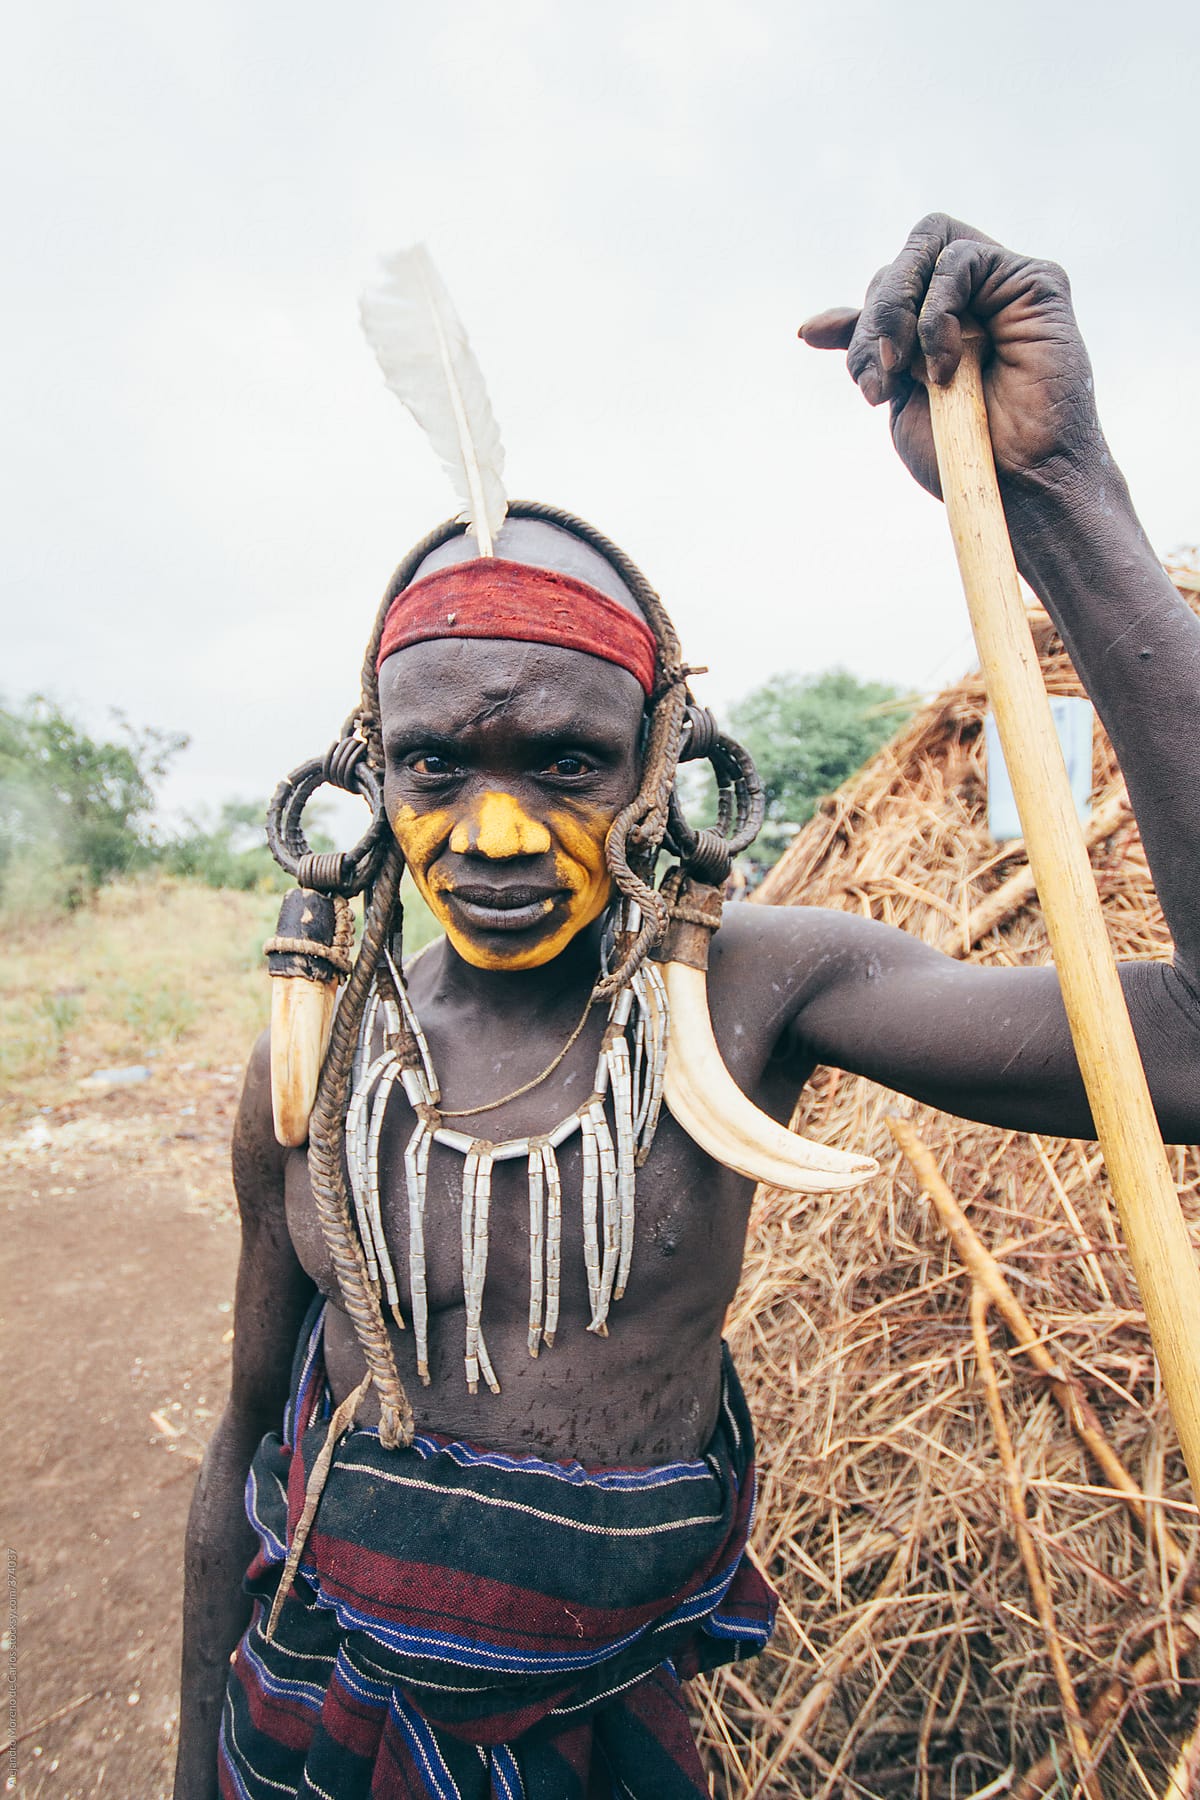 Mursi tribe man with traditional clothes and wood cane. Mago National park, Ethiopia, Africa